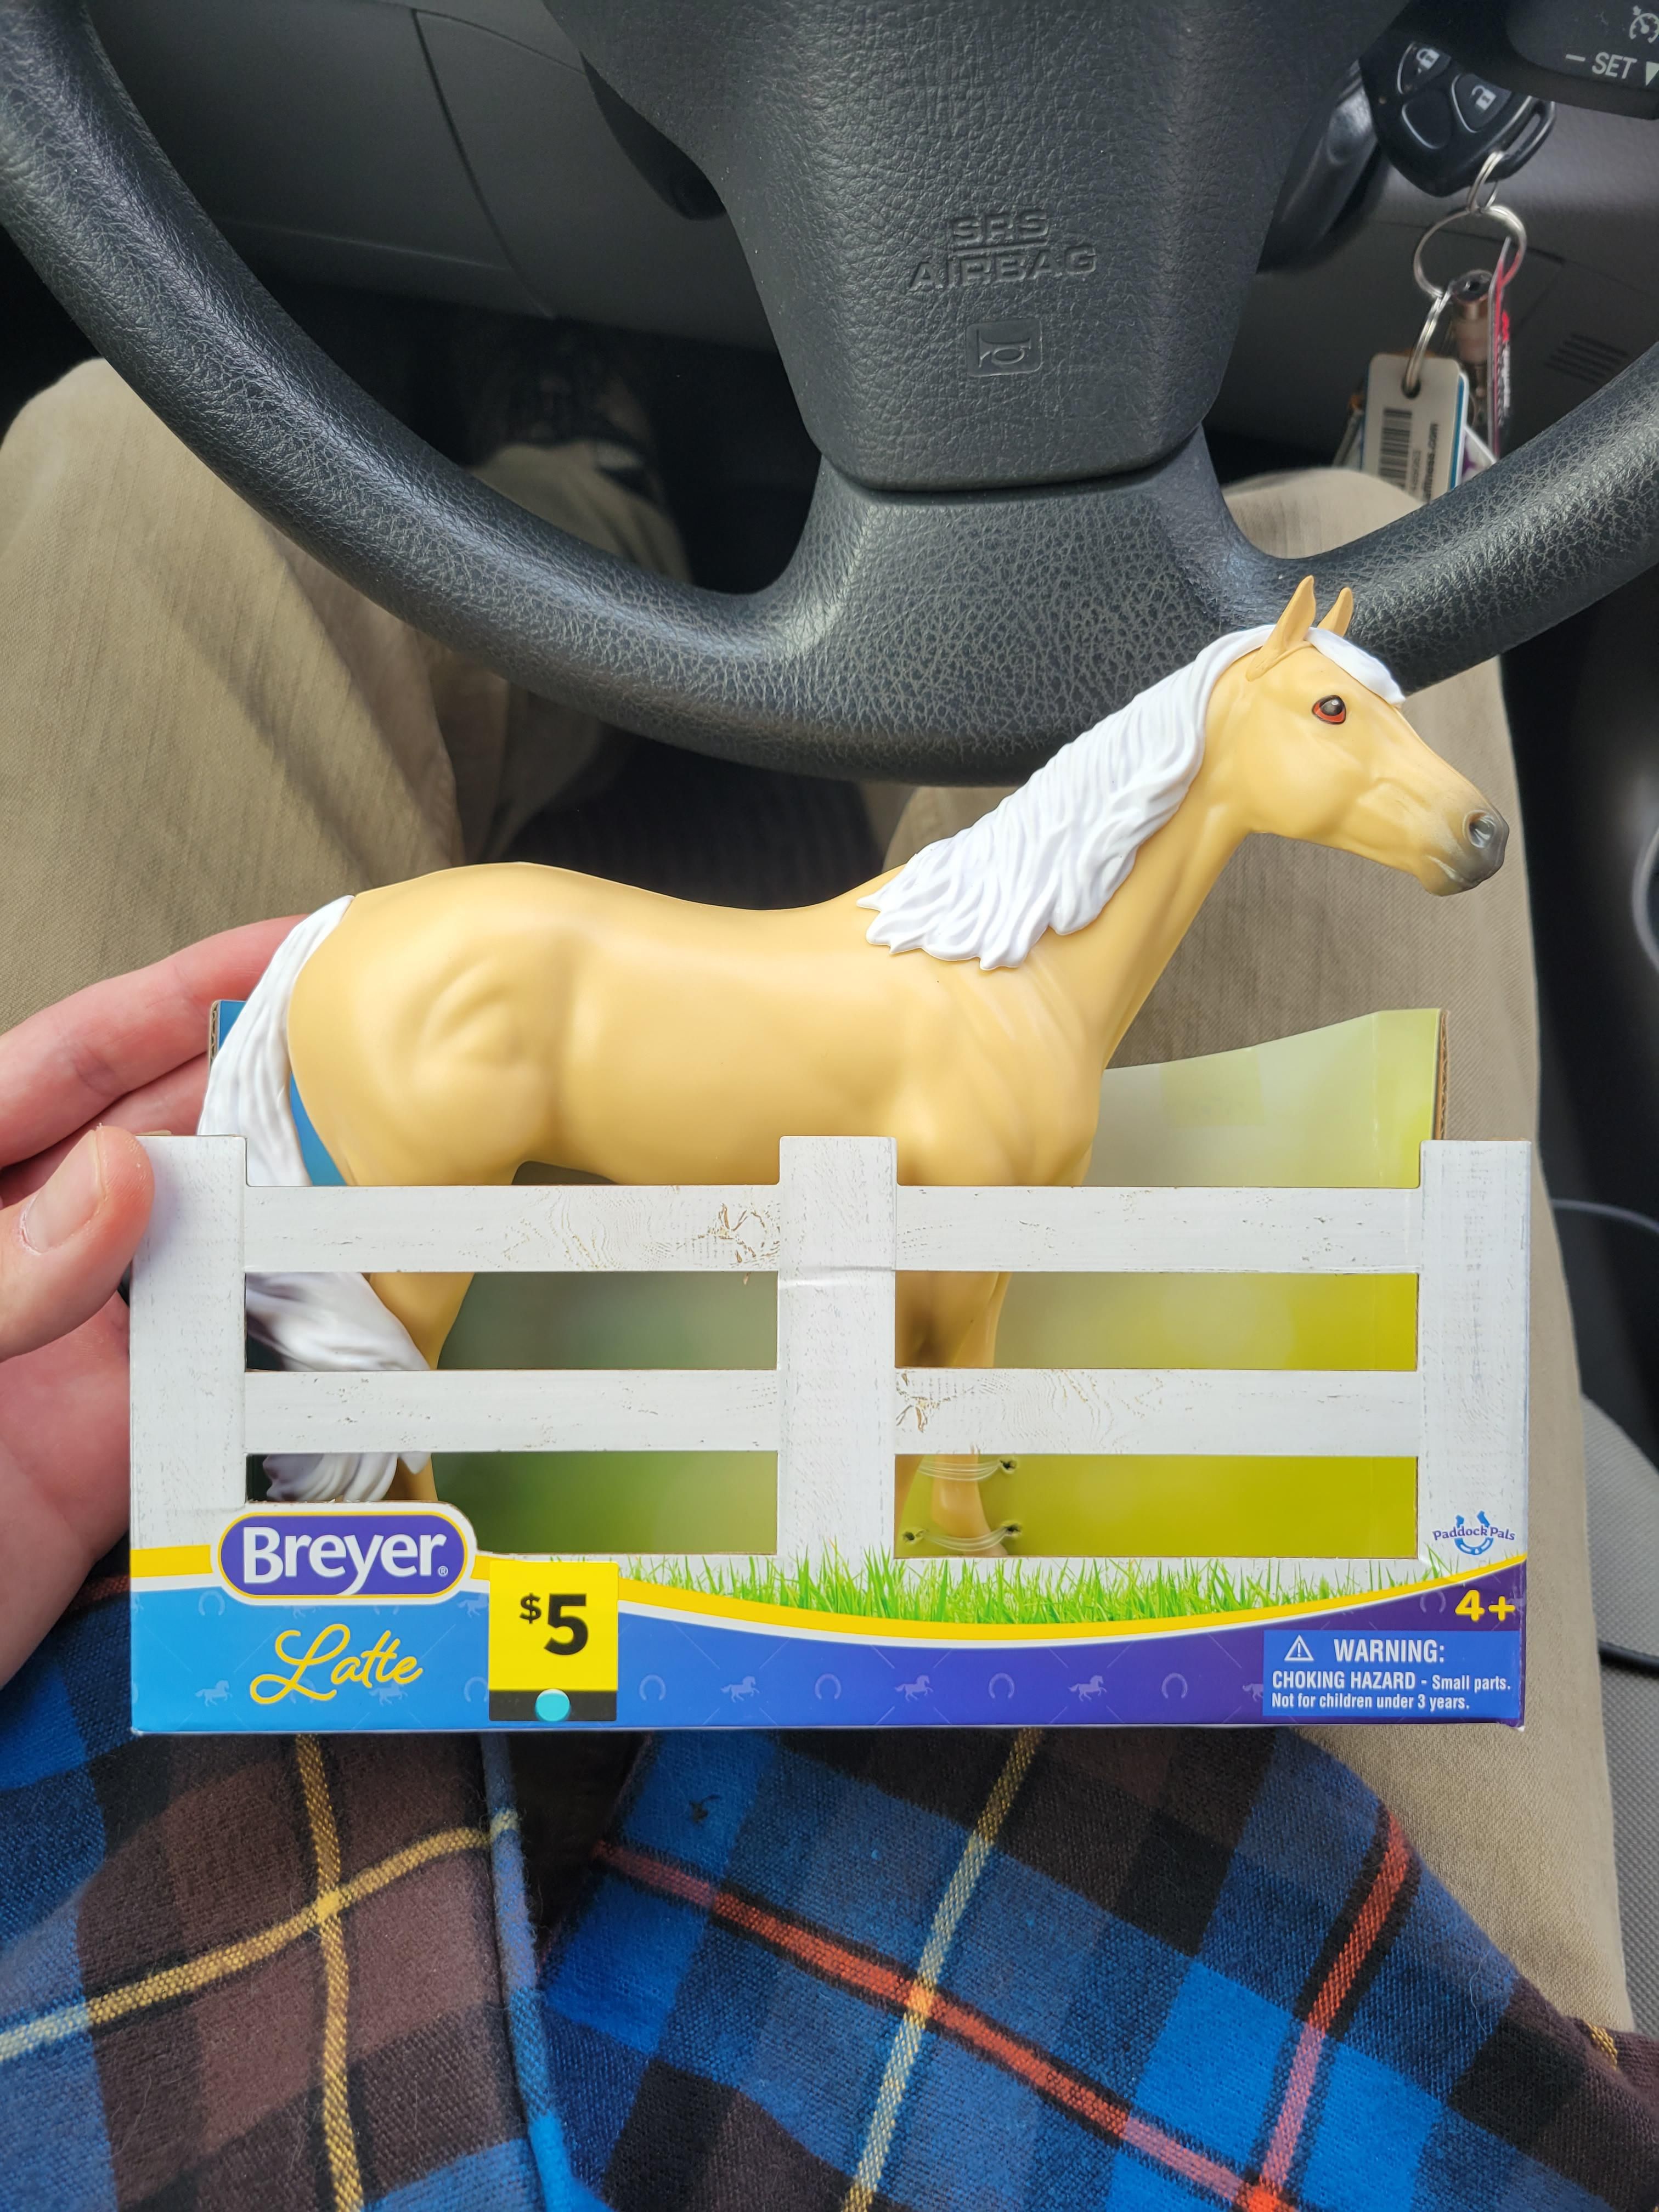 Went out to run errands, asked my wife if she wanted me to grab her anything. As a joke, she said a horse. Everyone, meet Latte.